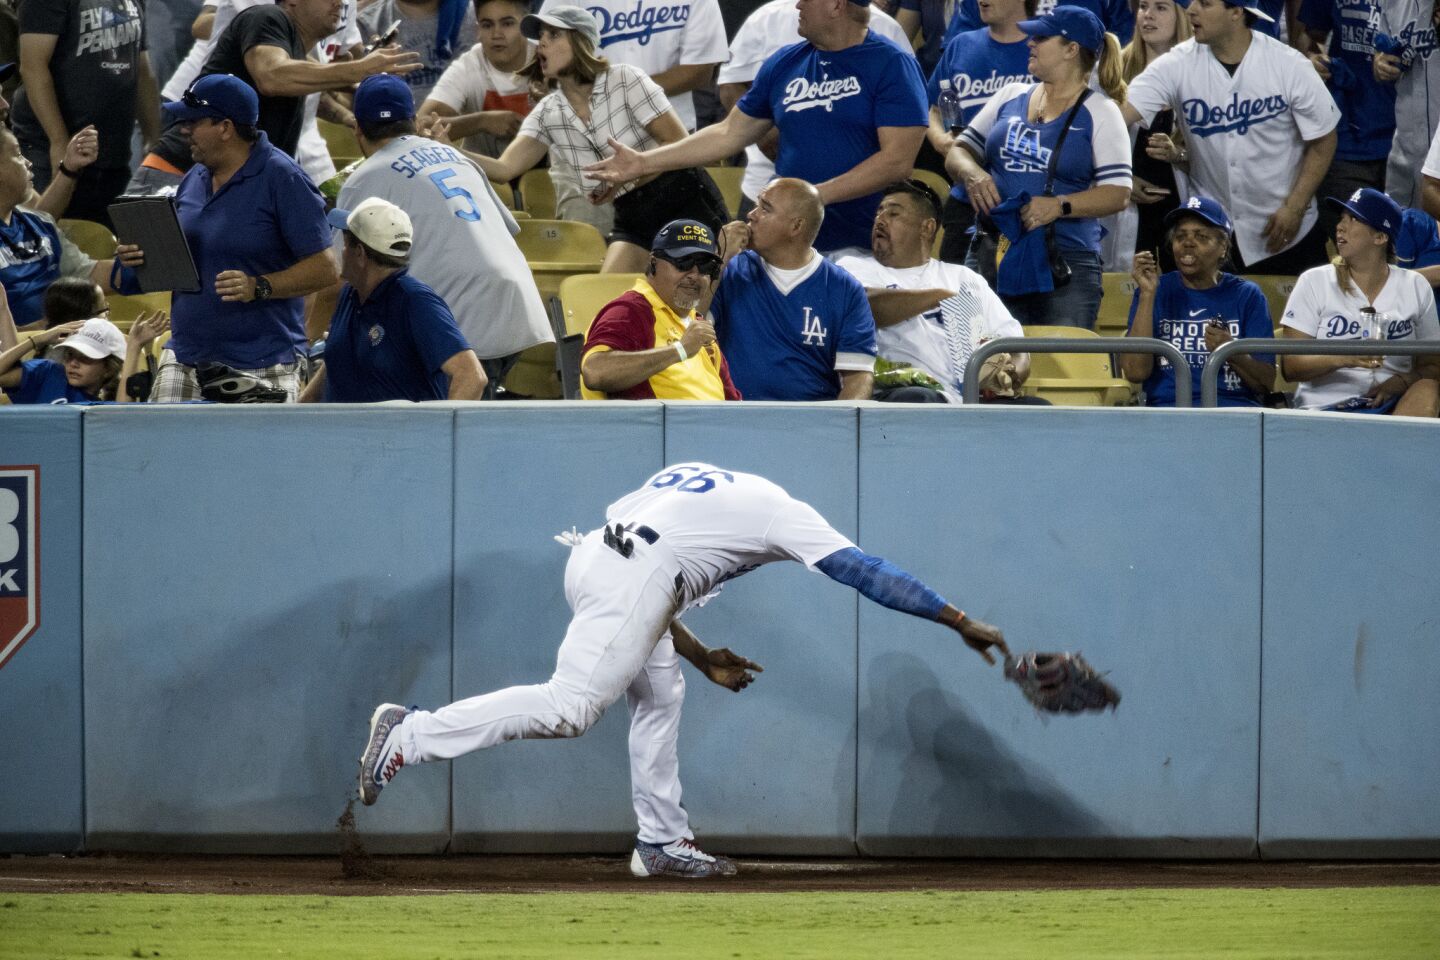 Dodgers right fielder Yasiel Puig throws his glove in anger after not being able to catch a ground-rule double by Astros third baseman Alex Bregman.